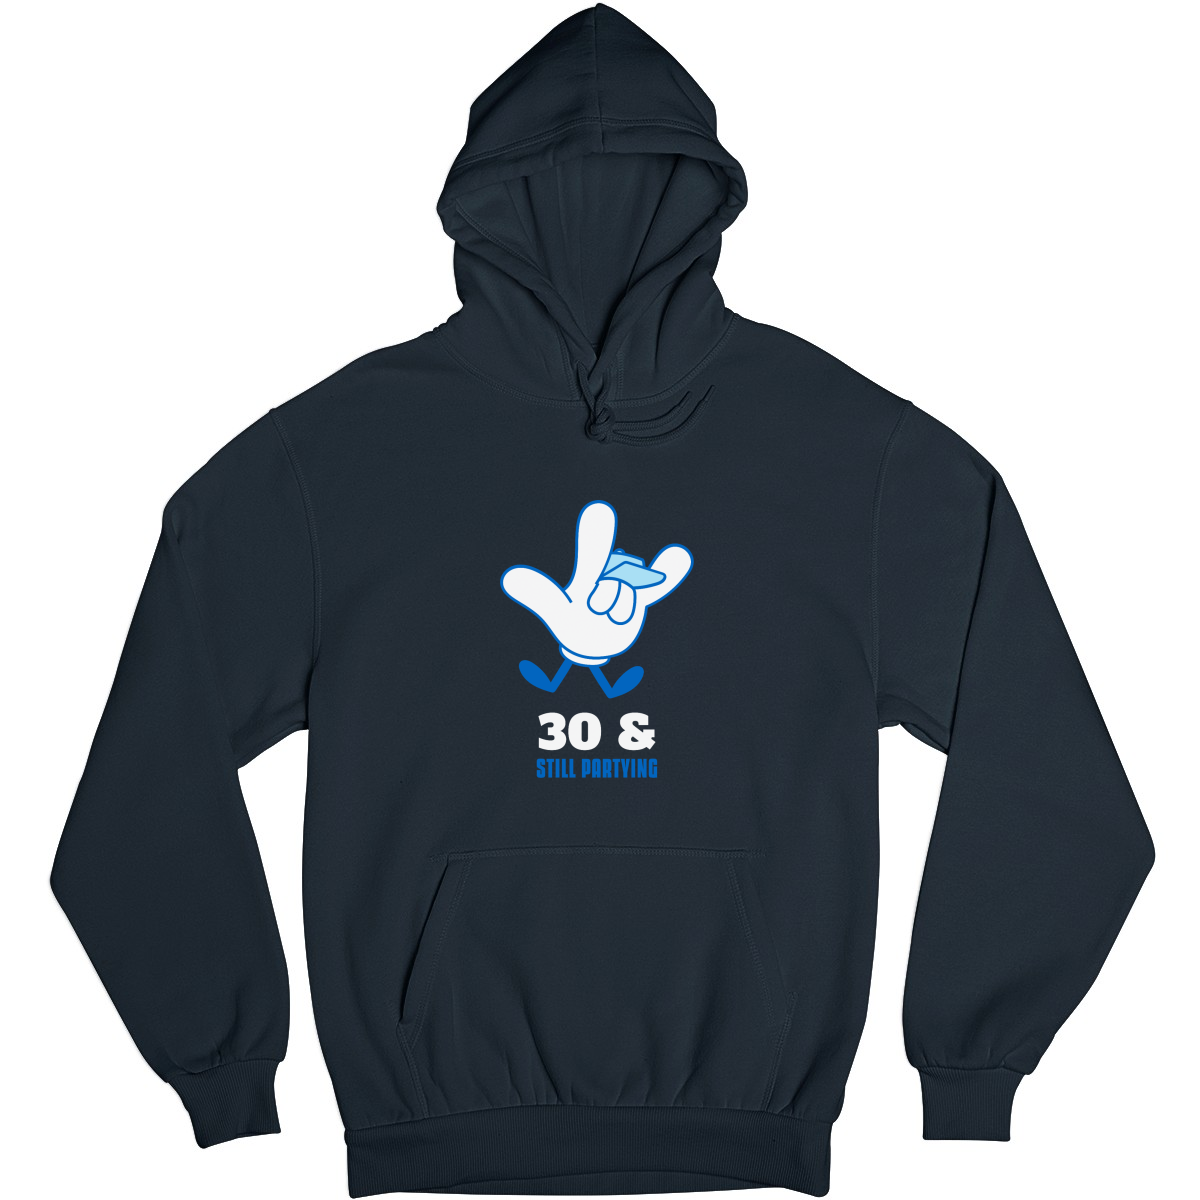 Thirty and Still Partying  Unisex Hoodie | Navy